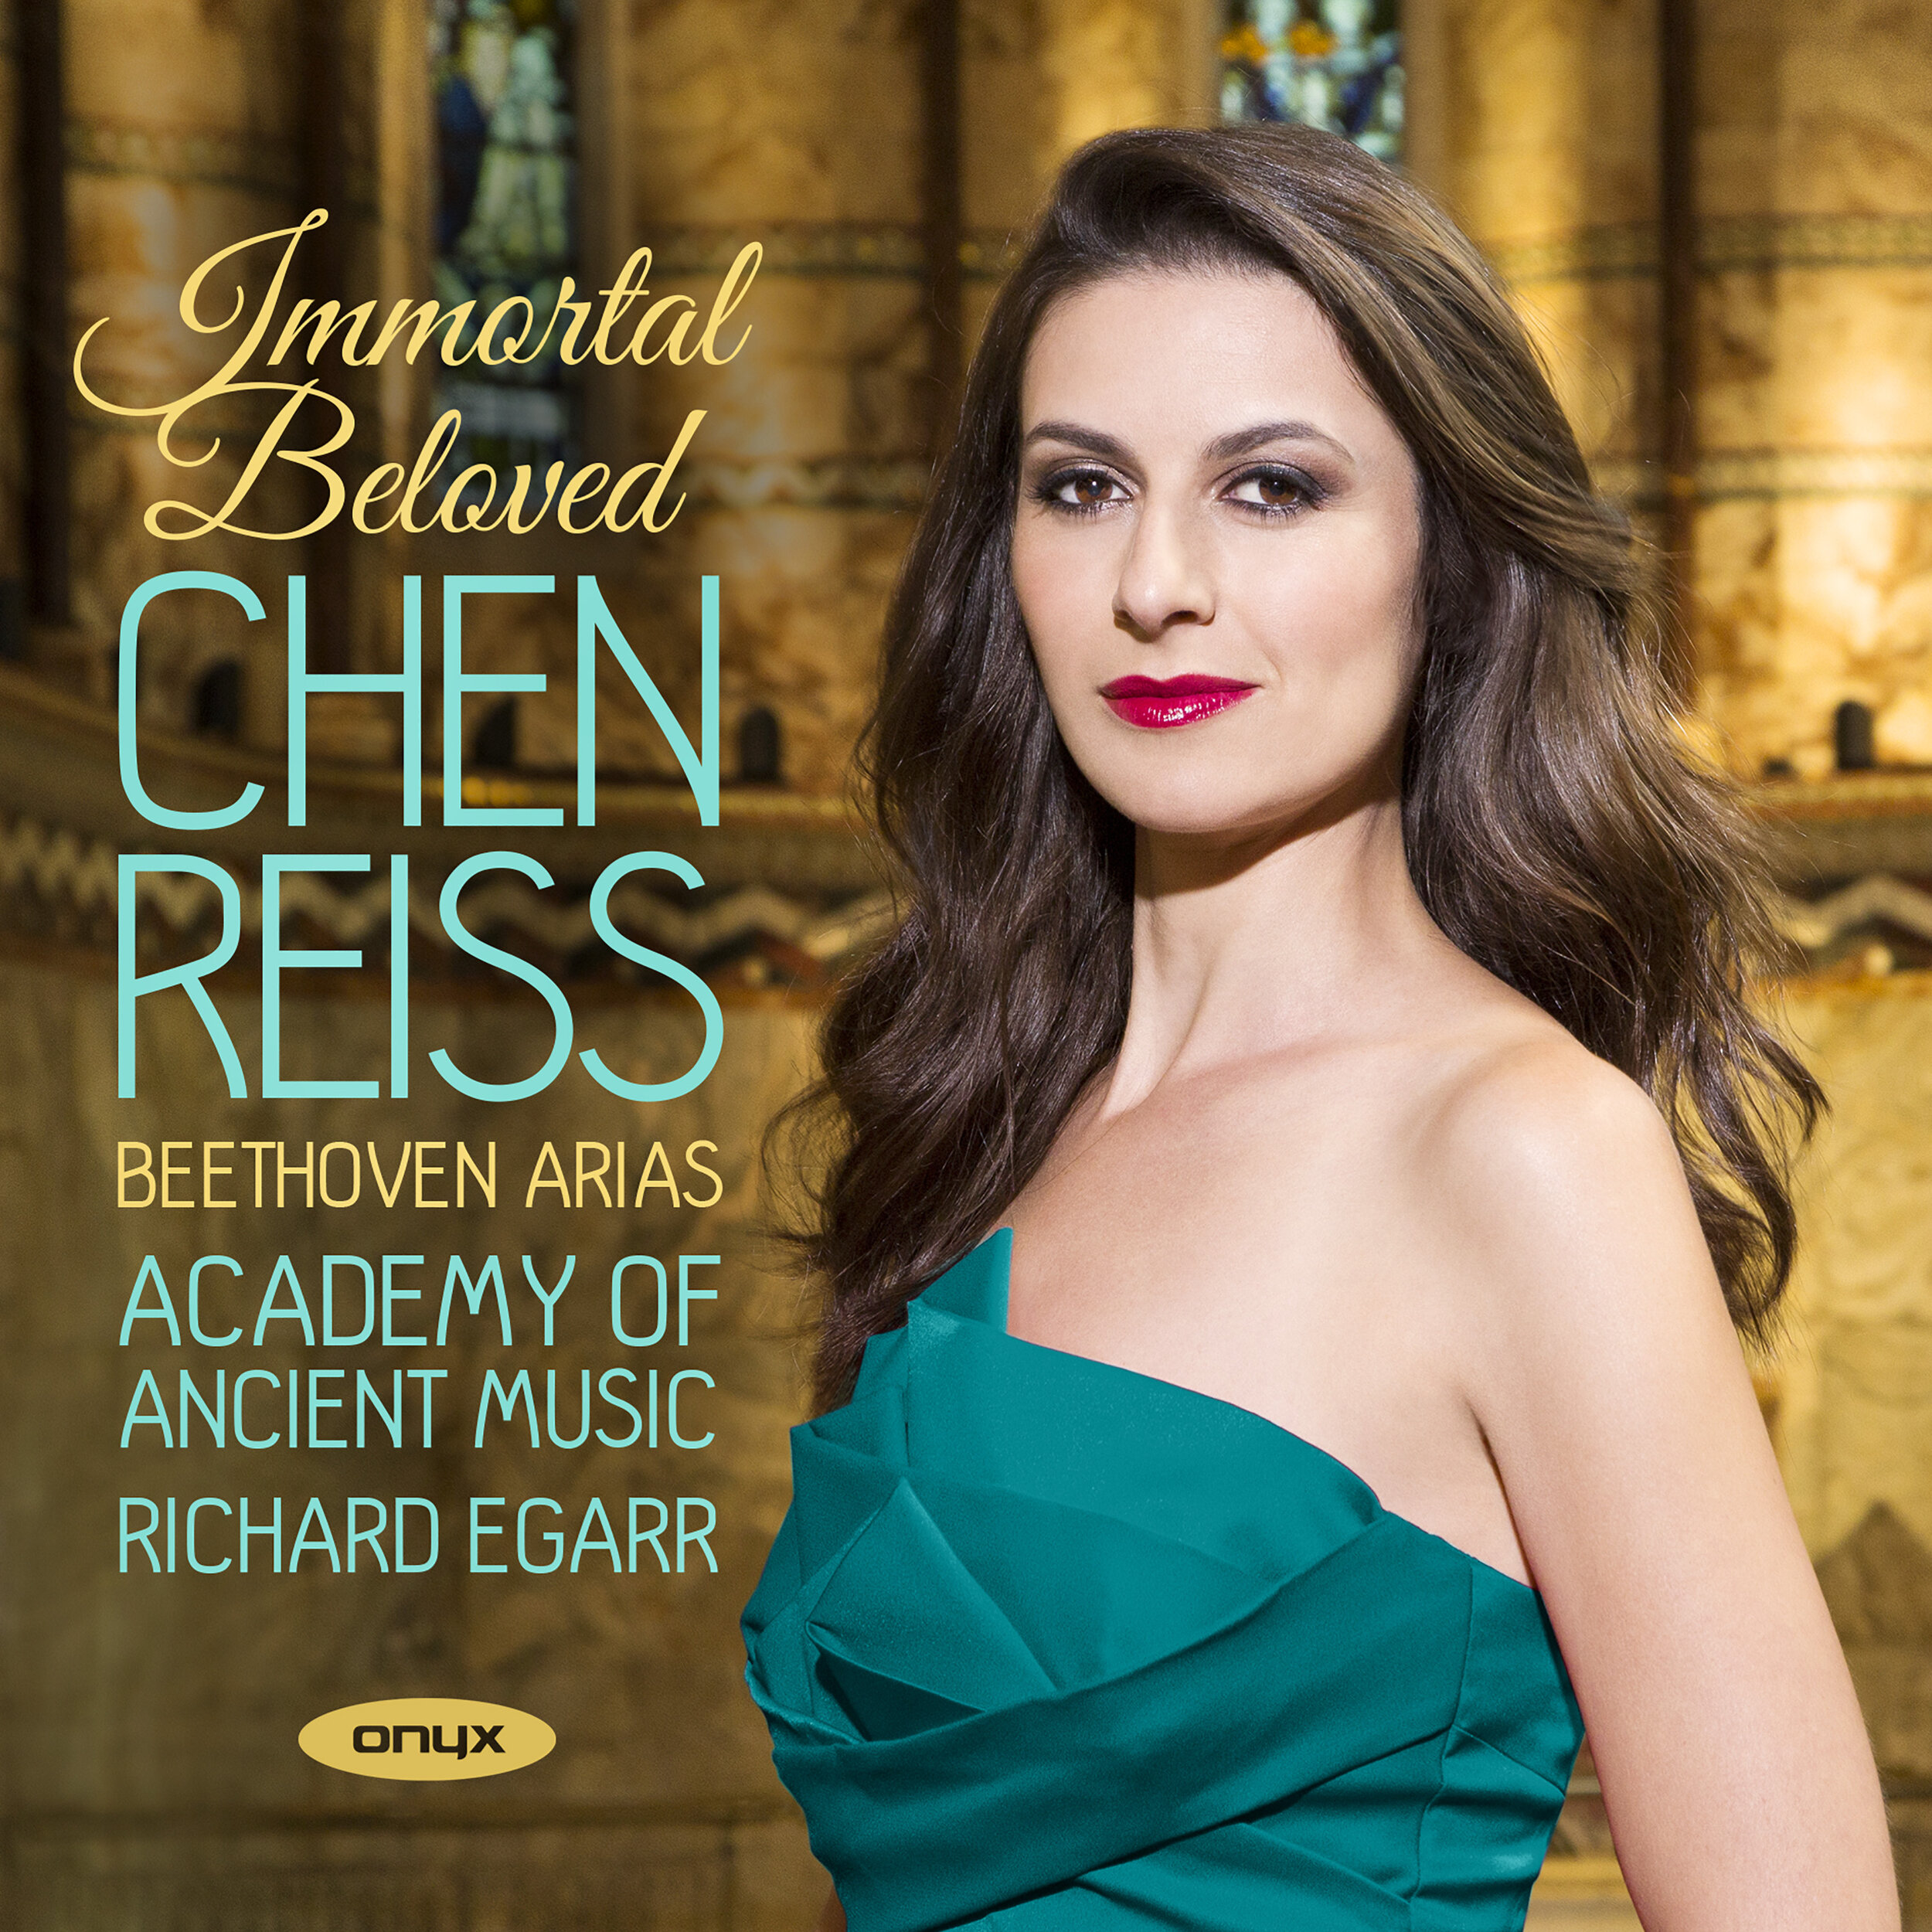 Onyx_Chen_Reiss_Beethoven_Cover_3000px.jpg